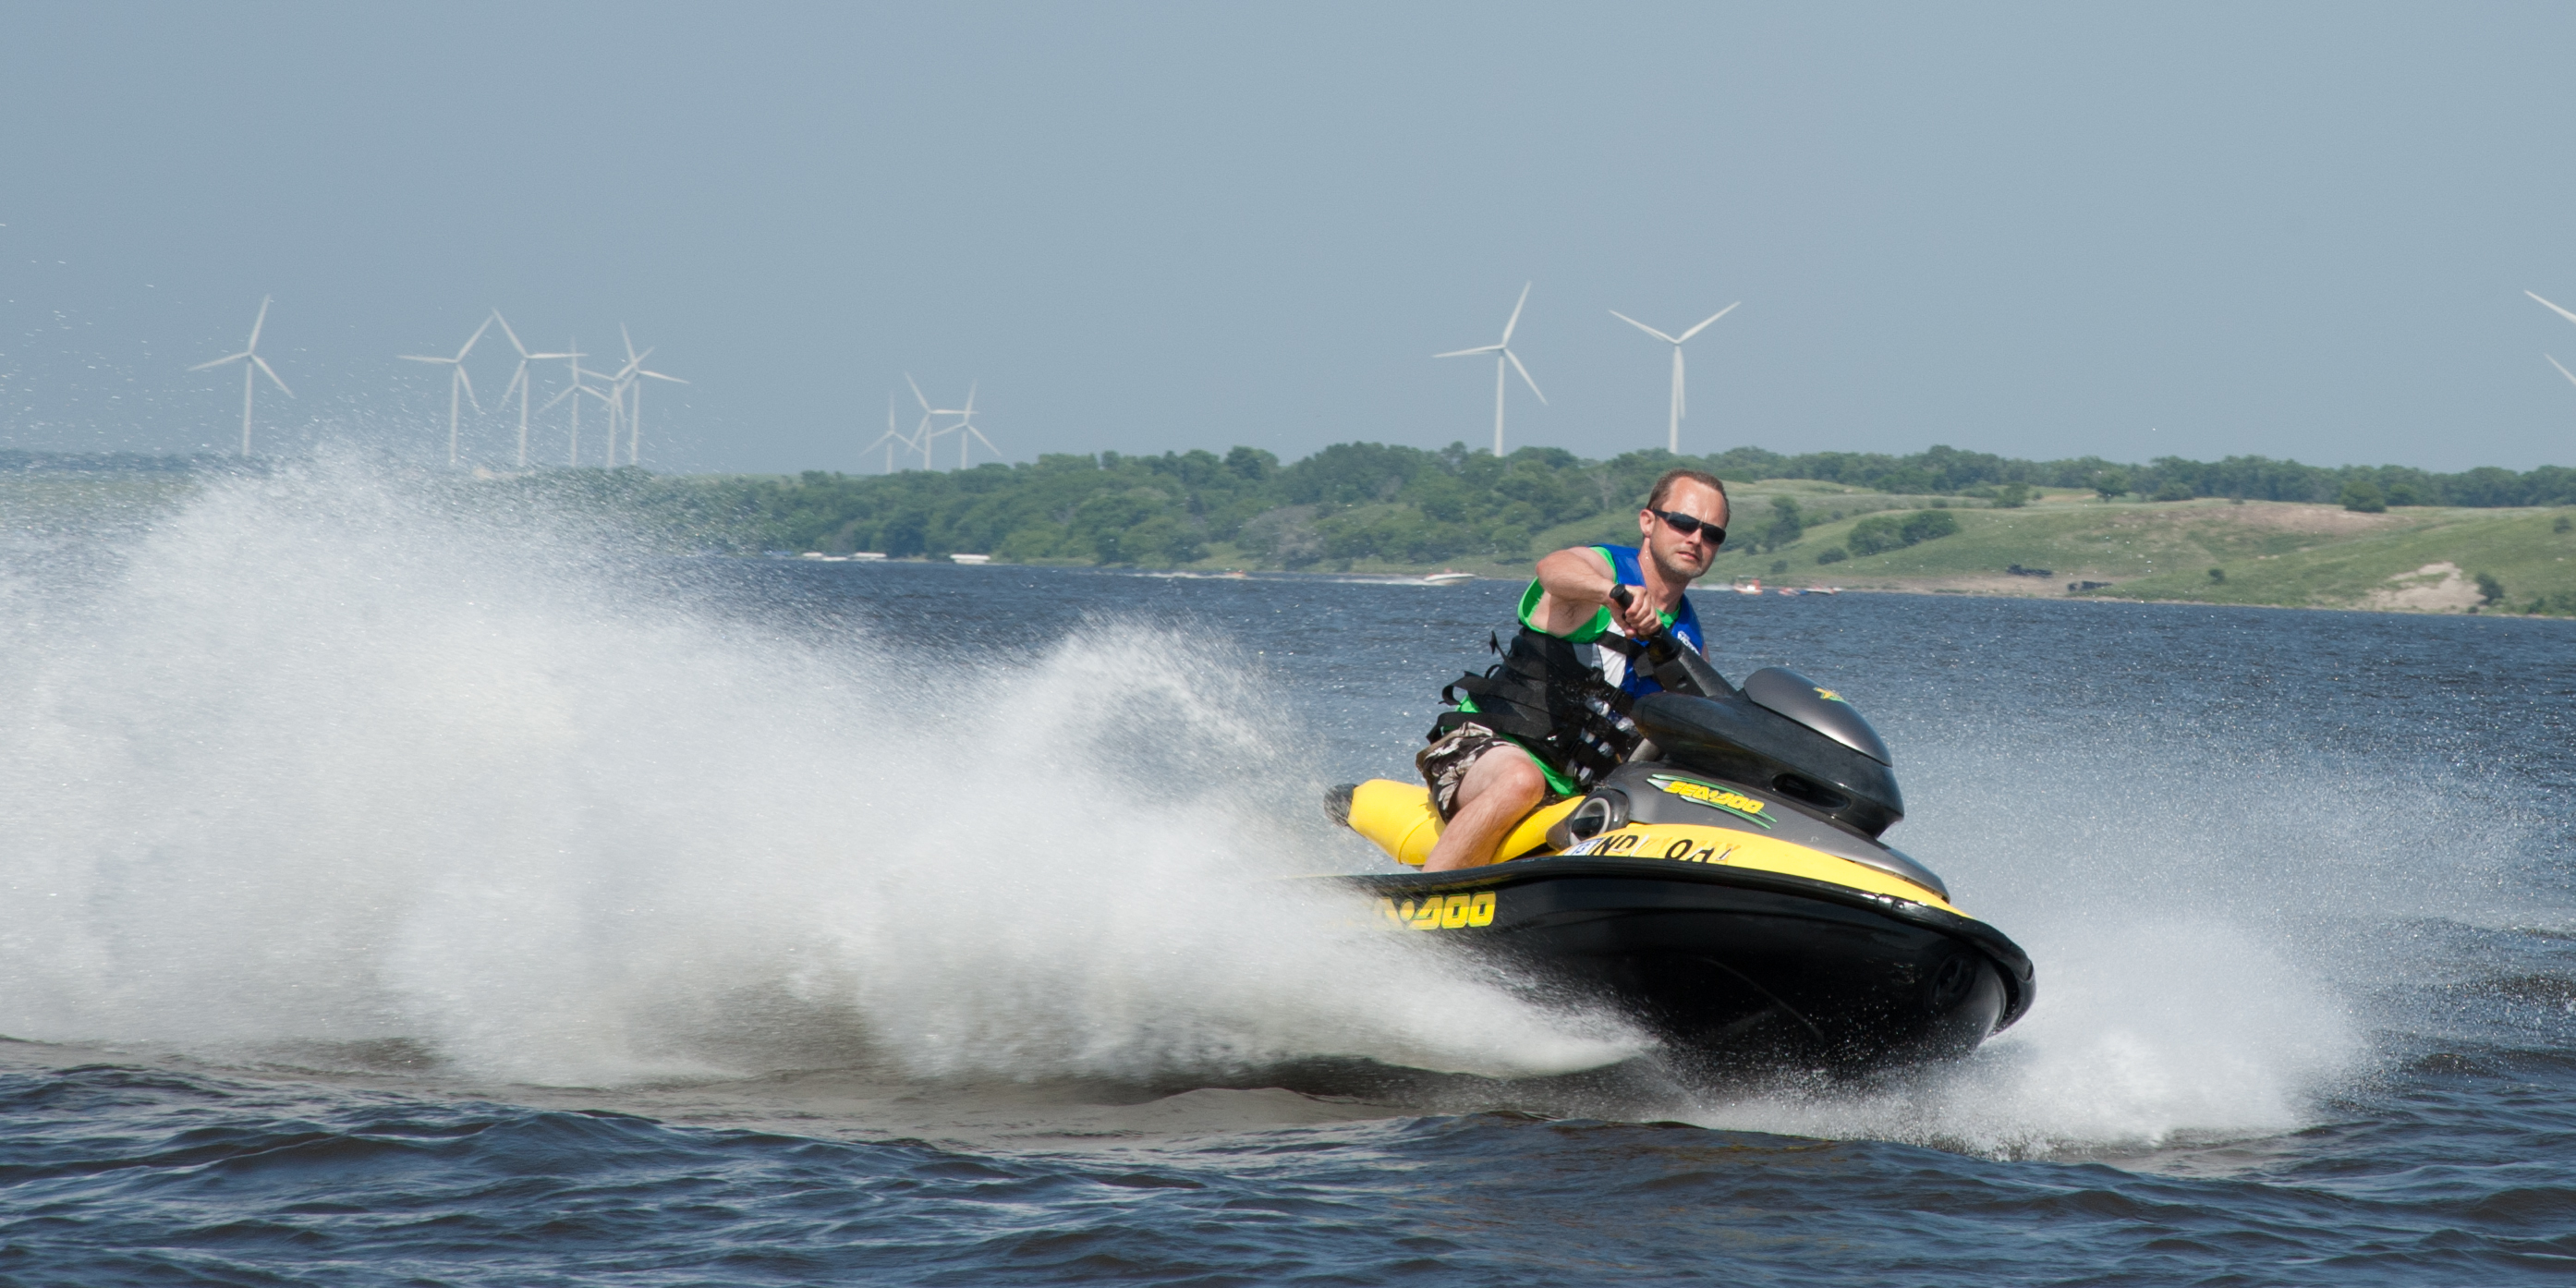 A man on a jetski in the water with wind mills in the background on the land